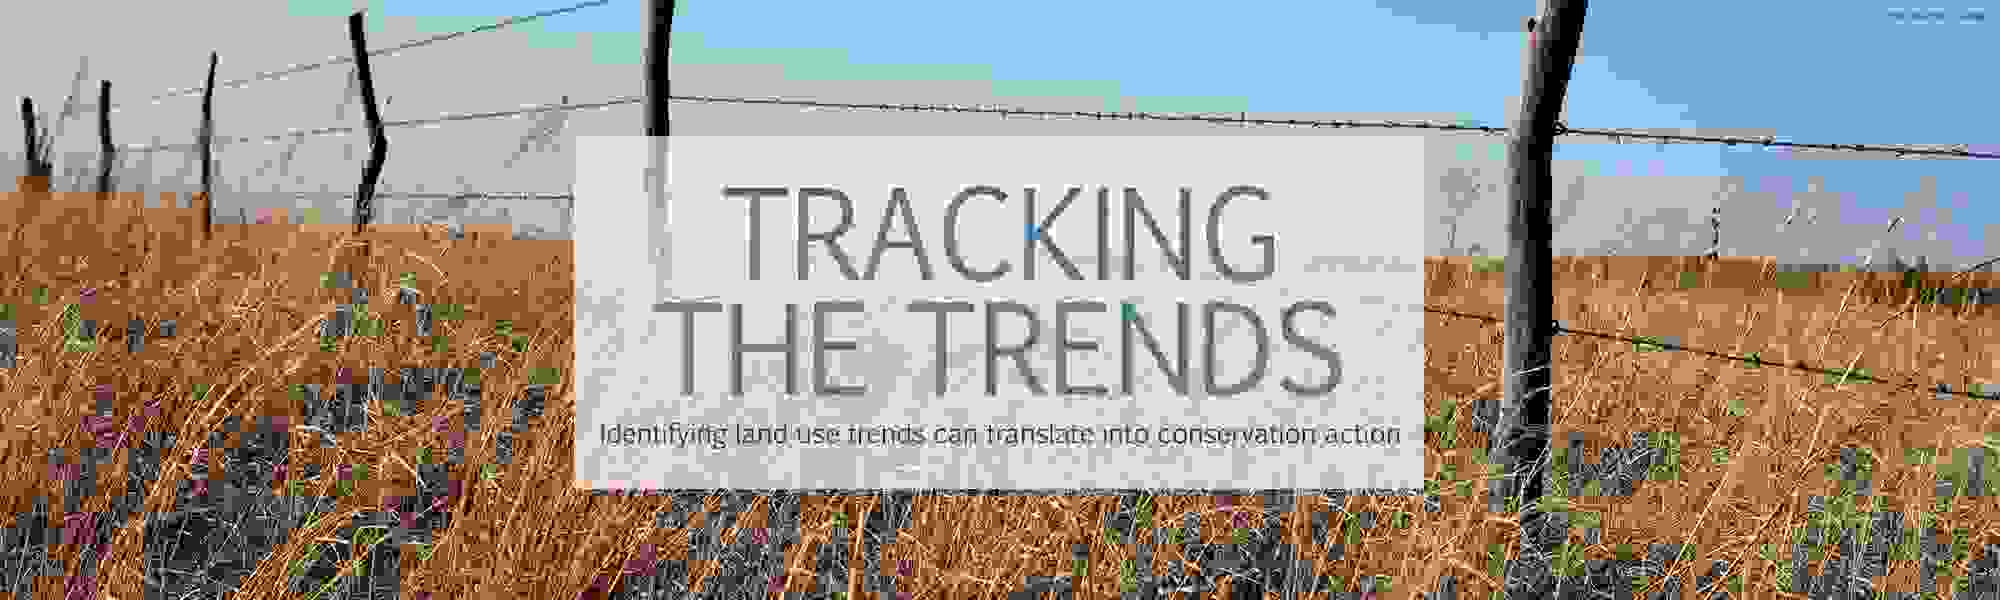 Tracking the trends